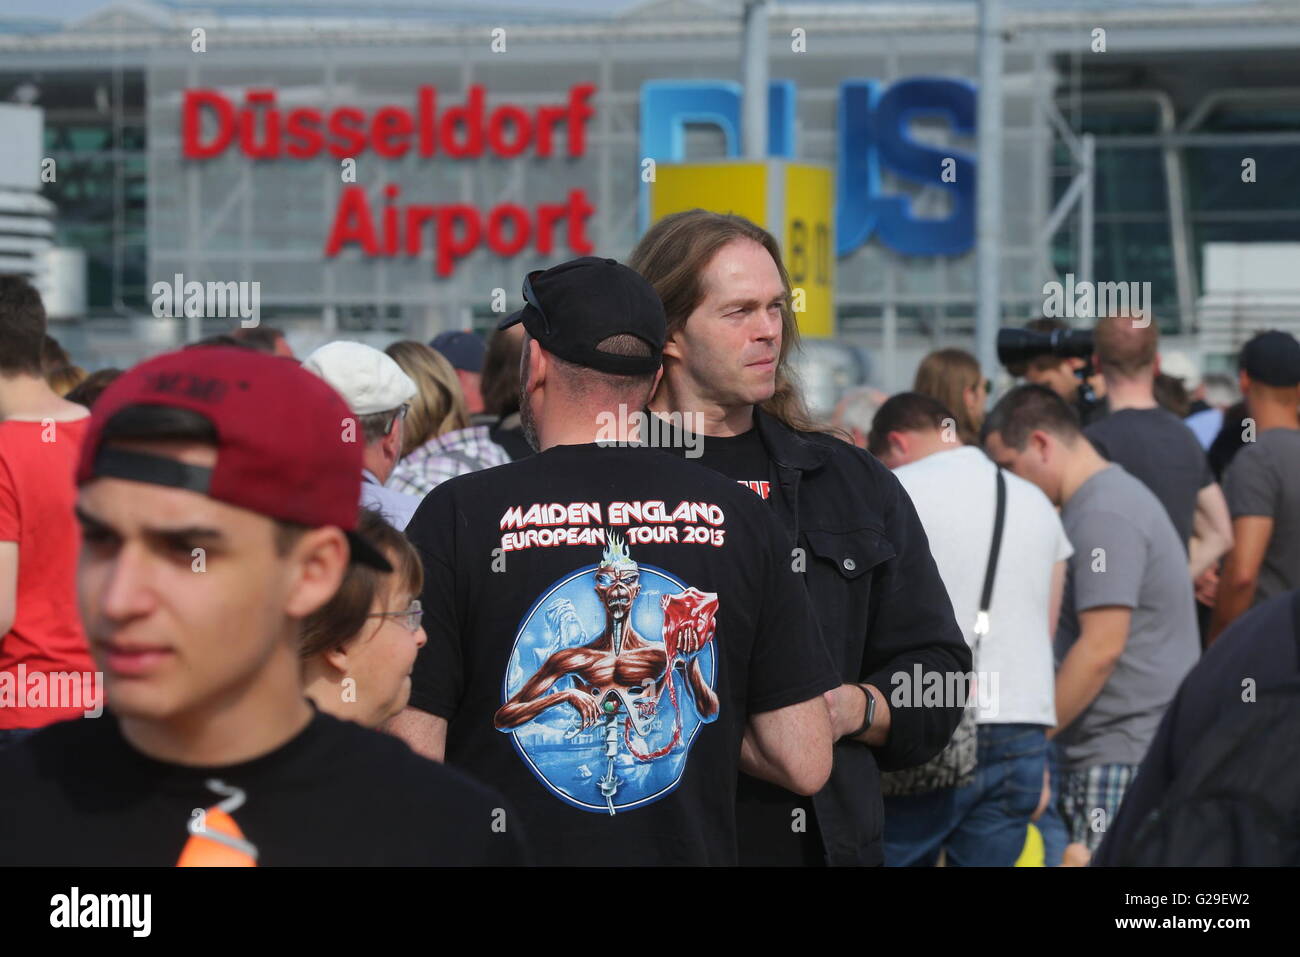 Duesseldorf, Germany. 26th May, 2016. Fans of the heavy metal band Iron Maiden wait for the arrival of the band's private plane at the airport in Duesseldorf, Germany, 26 May 2016. The band is performing at the festival 'Rock im Revier.' Photo: DAVID YOUNG/dpa/Alamy Live News Stock Photo